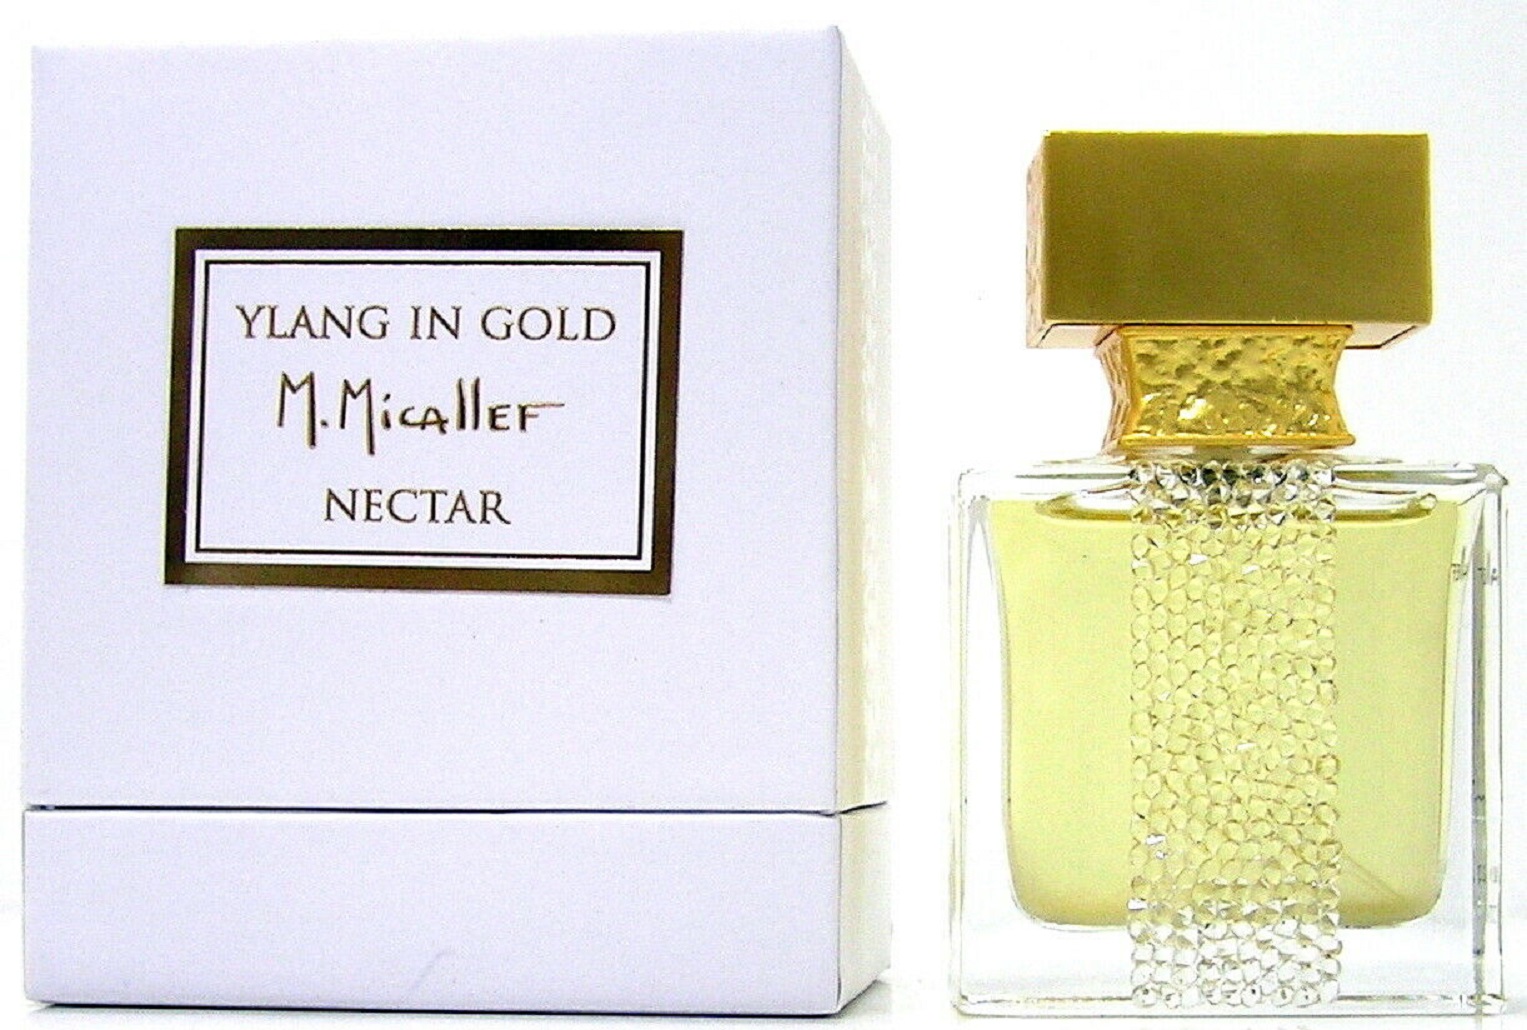 Ylang in gold. Духи Micallef Ylang in Gold. Ylang in Gold m. Micallef 30 ml. M. Micallef Ylang in Gold Eau de Parfum. Ylang in Gold EDP 100ml.